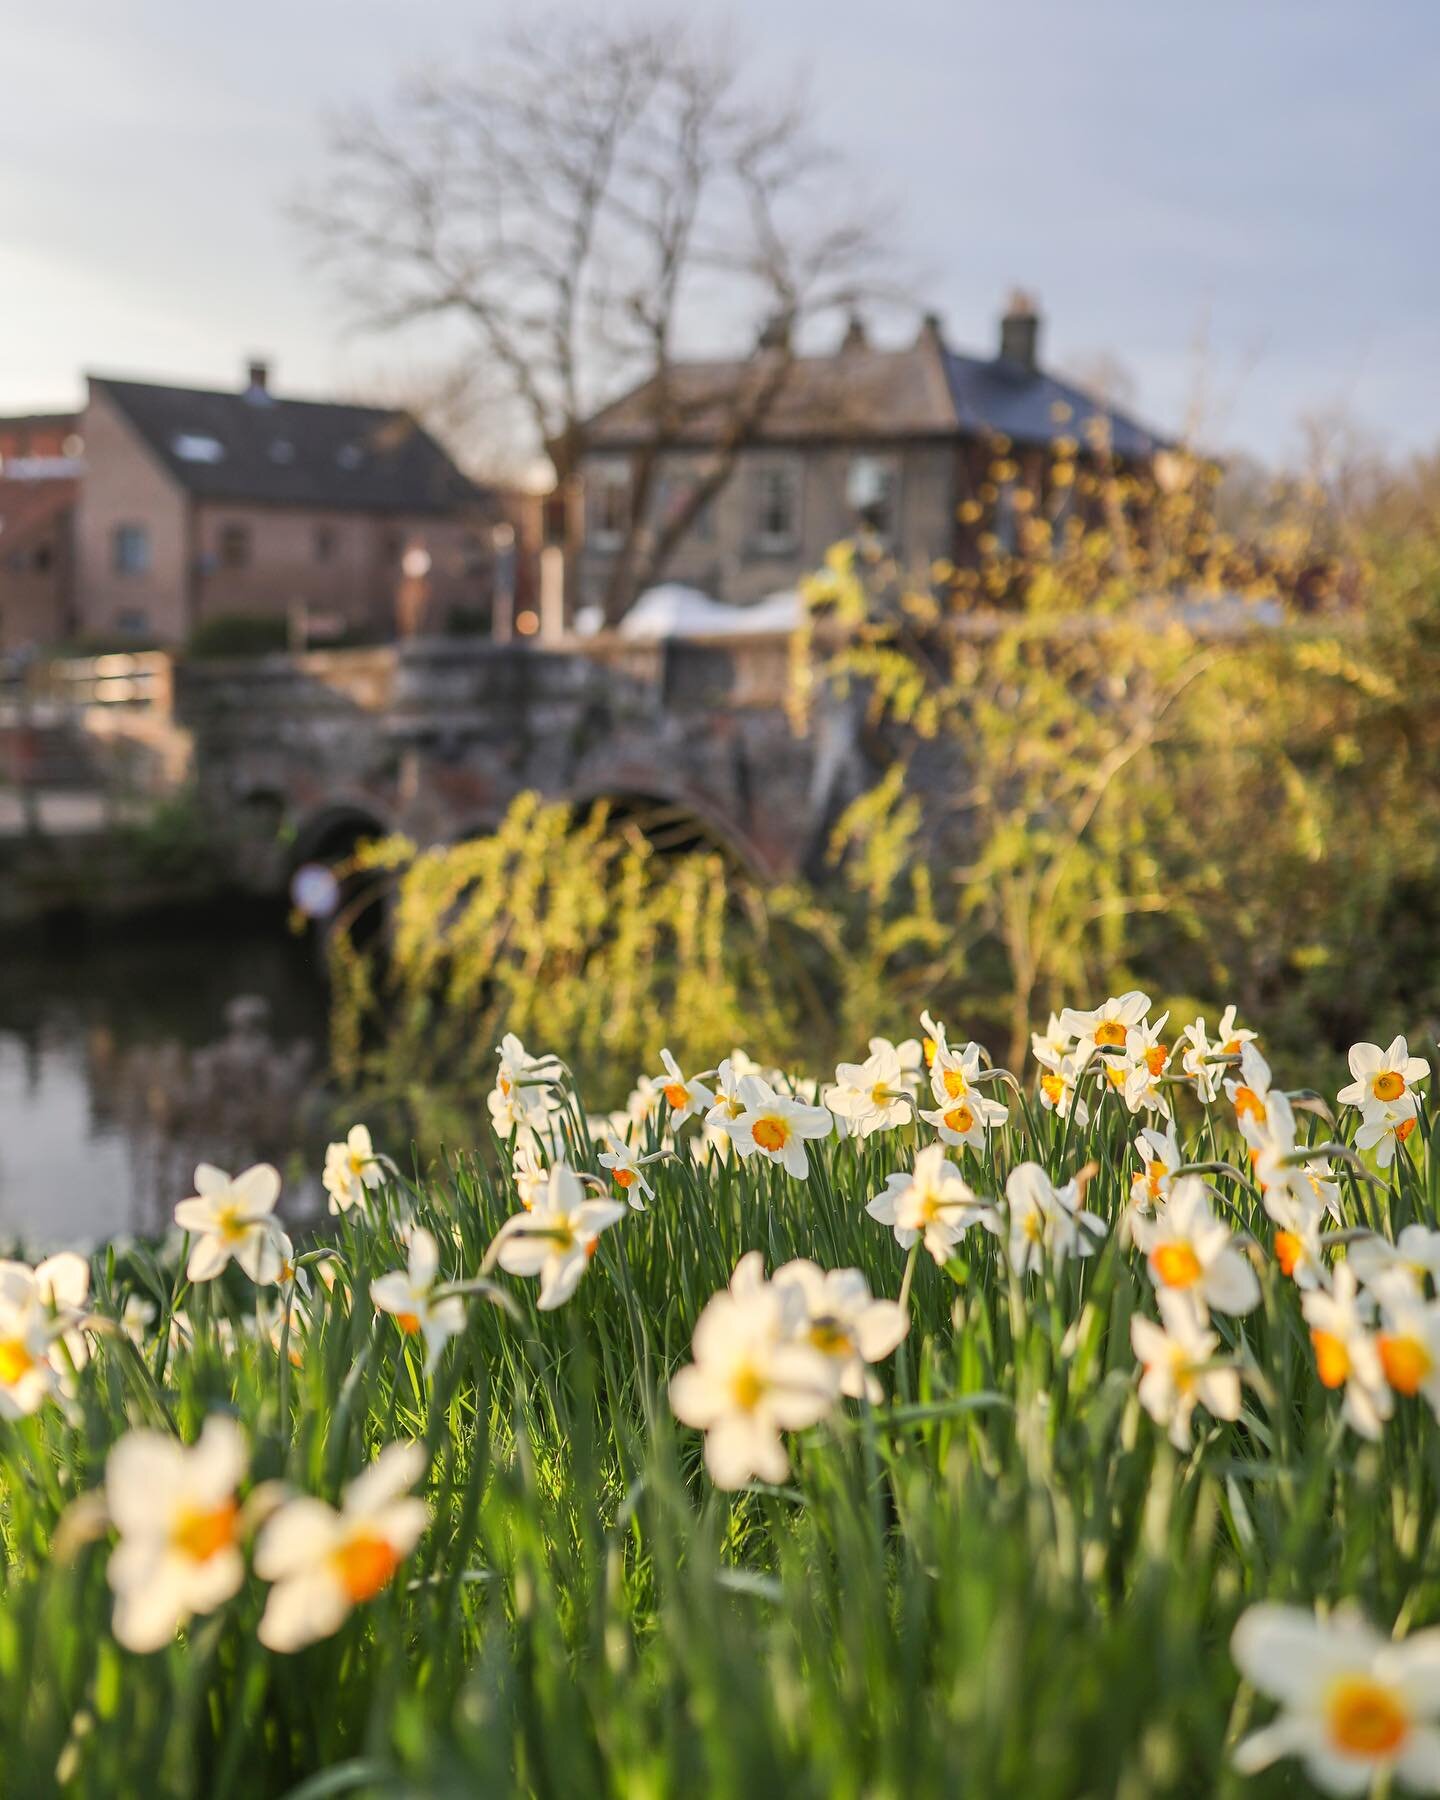 Happy Monday everyone 🌼

We wish you a great week, look at these beautiful flowerbeds of daffodils 😍

Do you recognise where this picture was taken from ? 👀